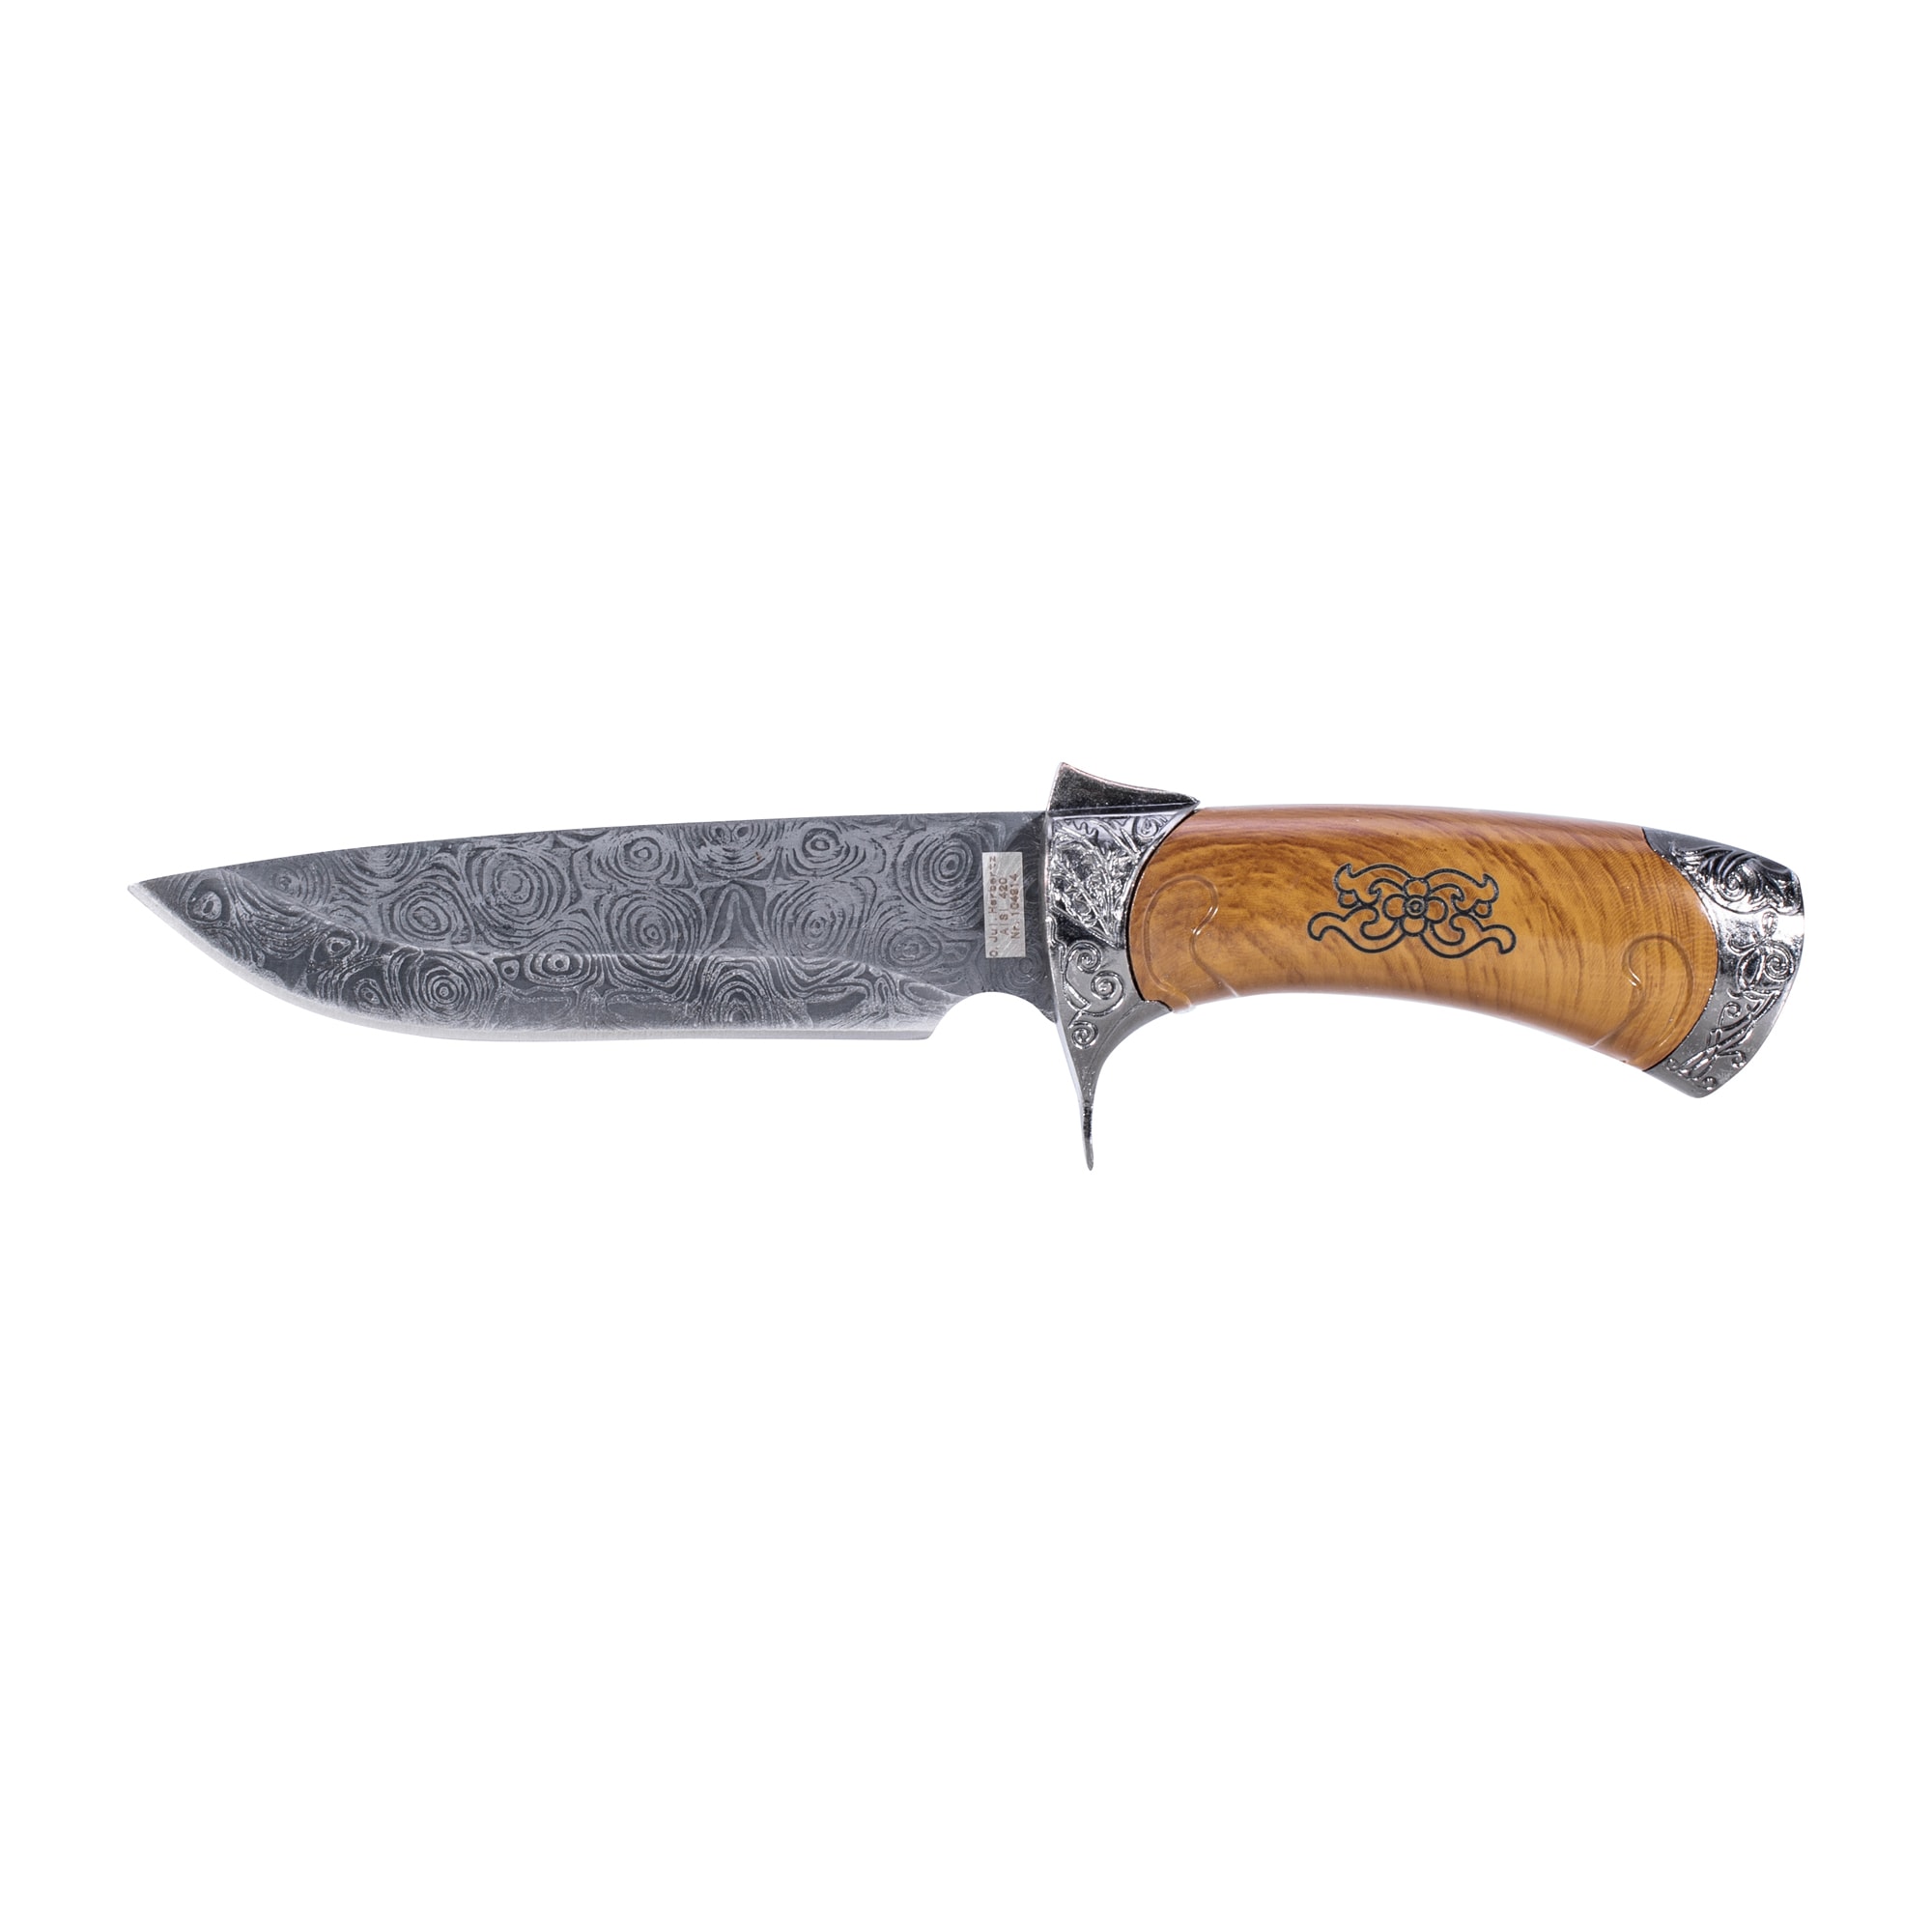 Purchase the Knife Damaskus by ASMC